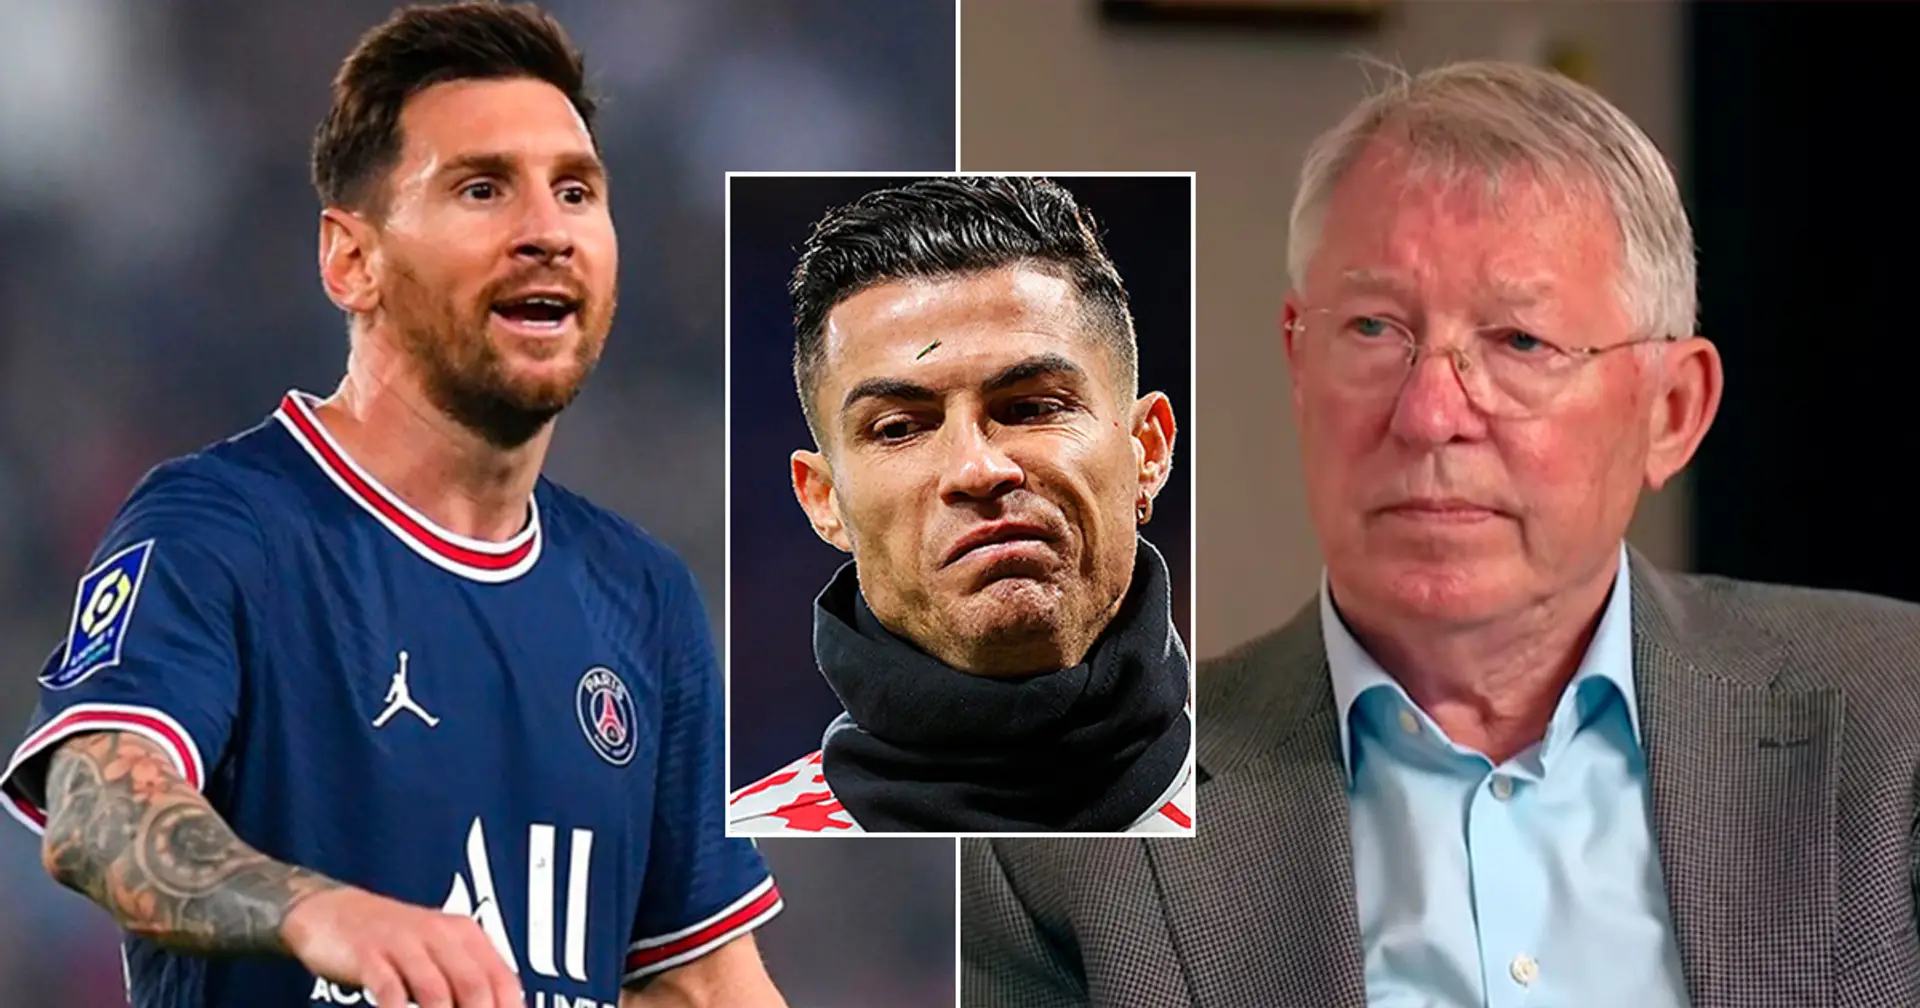 Sir Alex predicted Leo Messi's struggles with PSG years ago, compared him to Ronaldo 